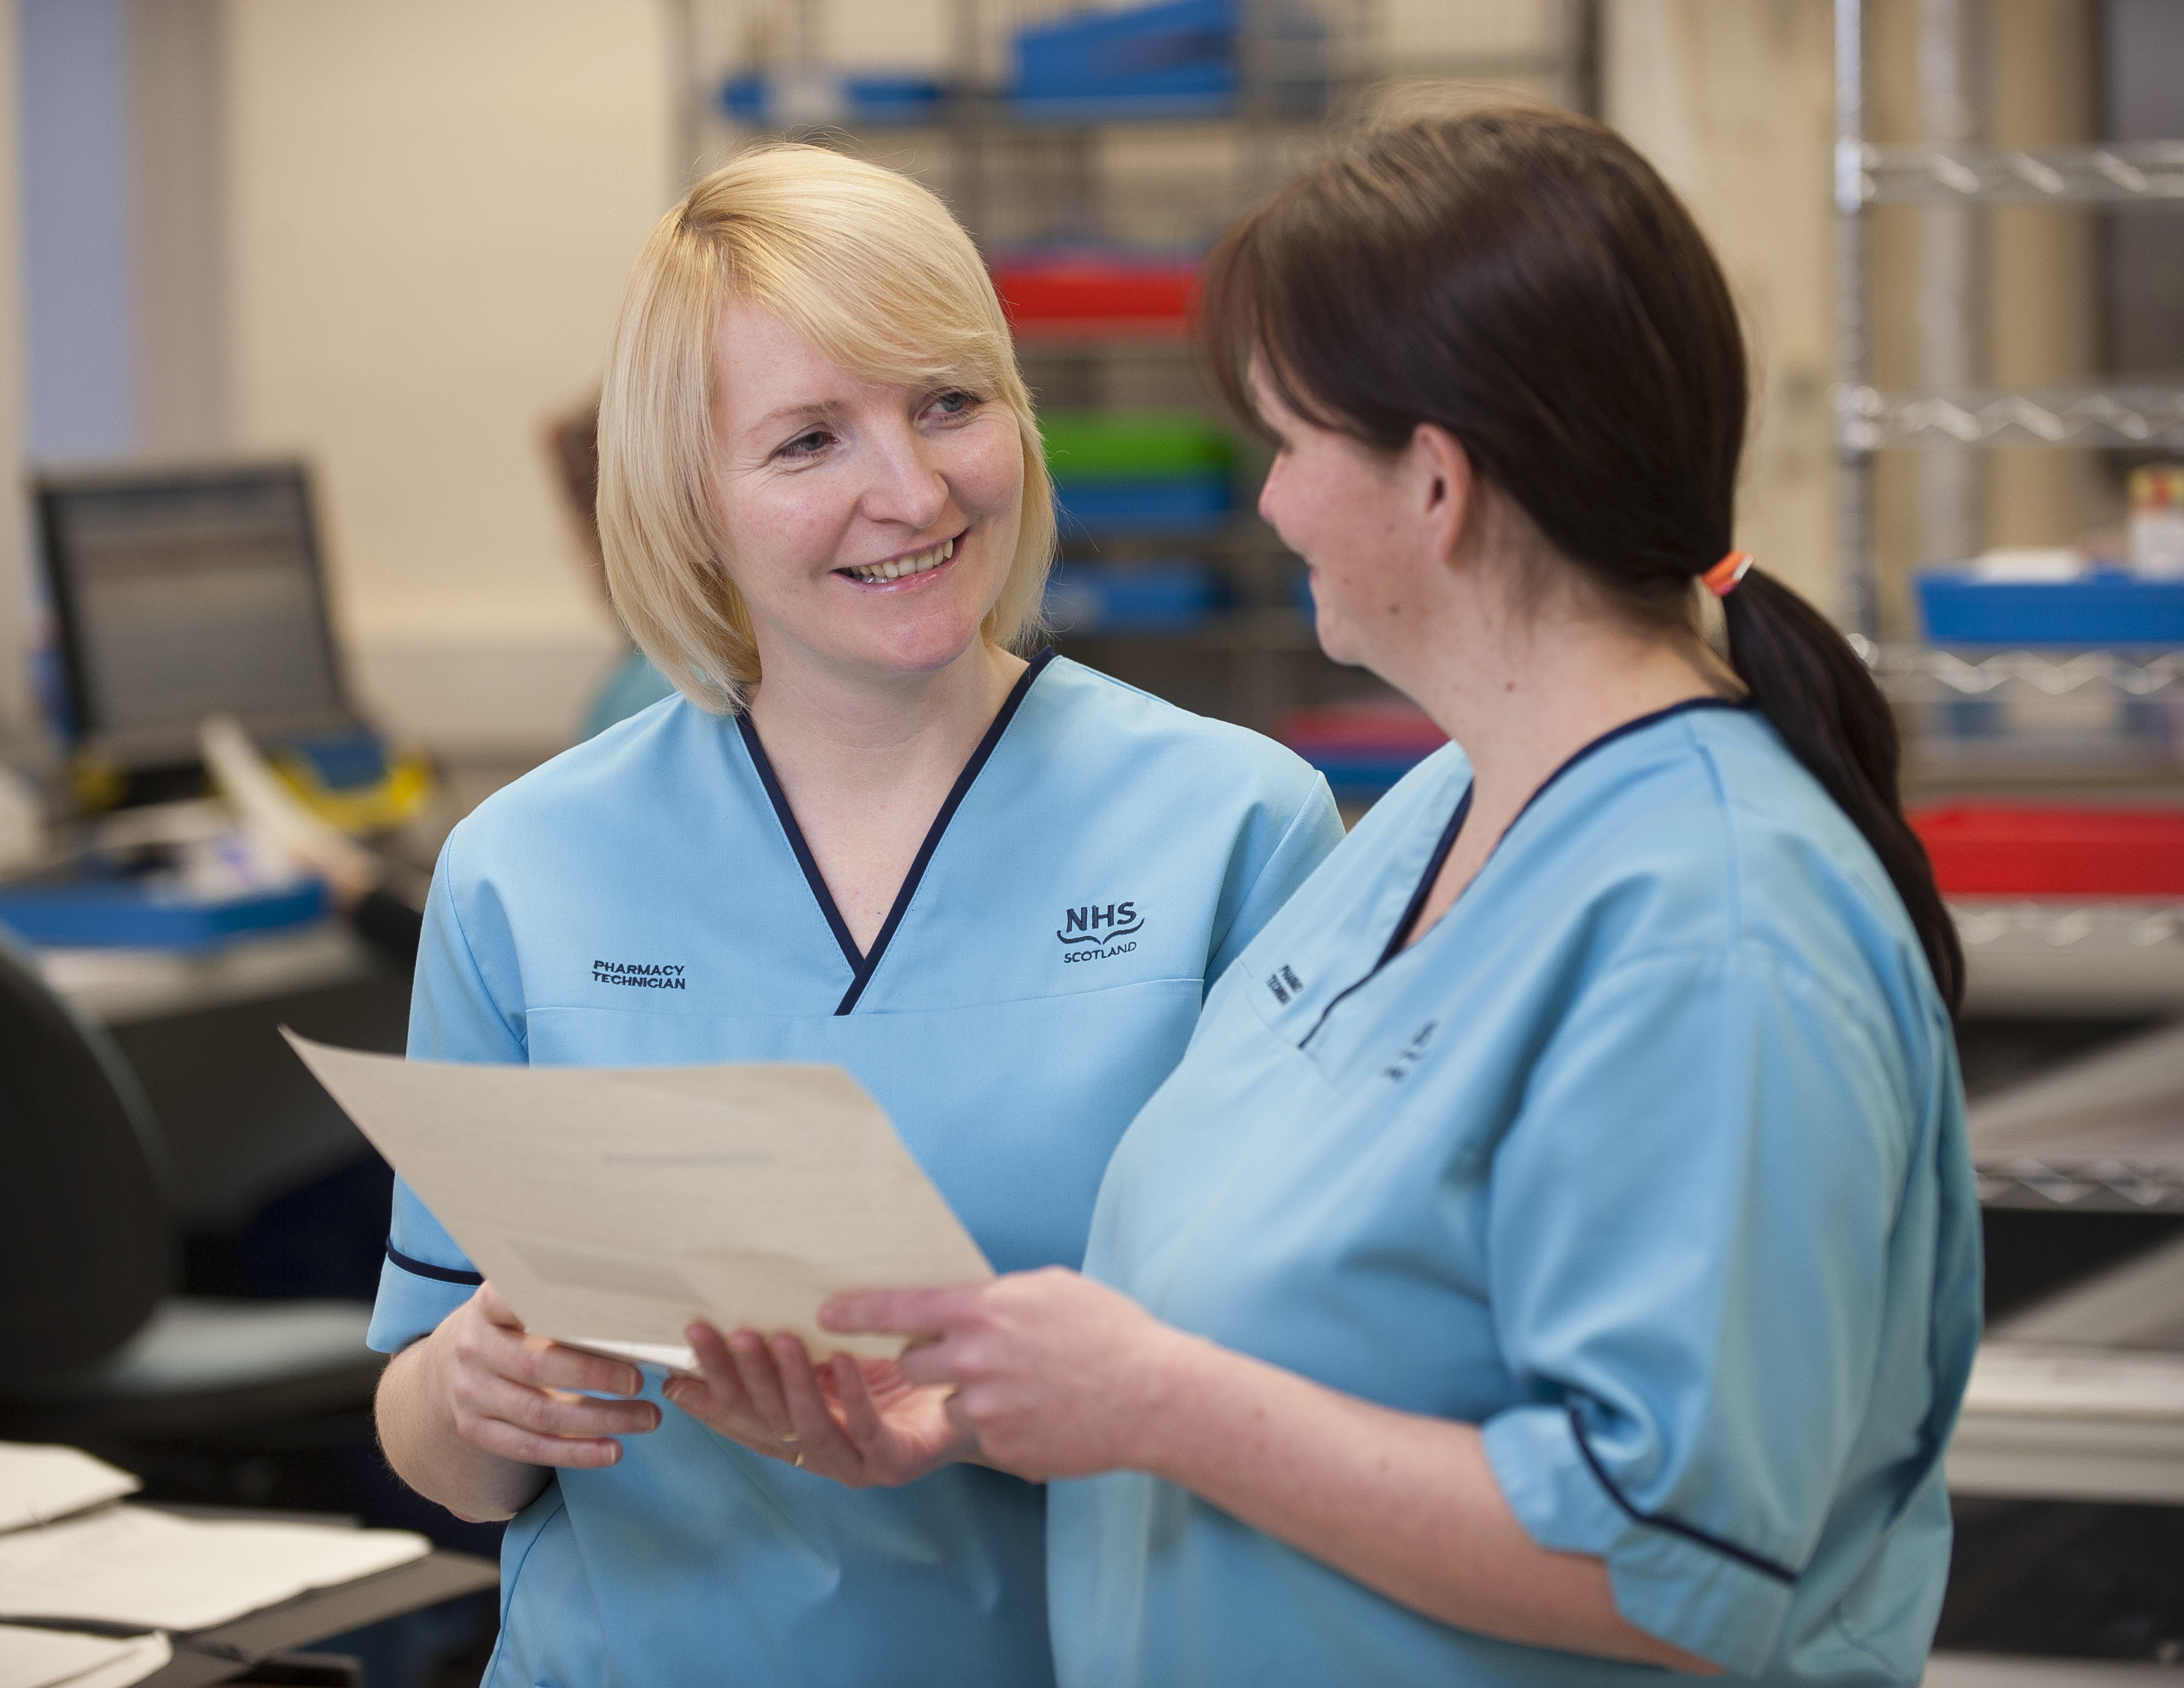 Two NHS Scotland nursing staff speaking to each other, smiling, at a nurses station.